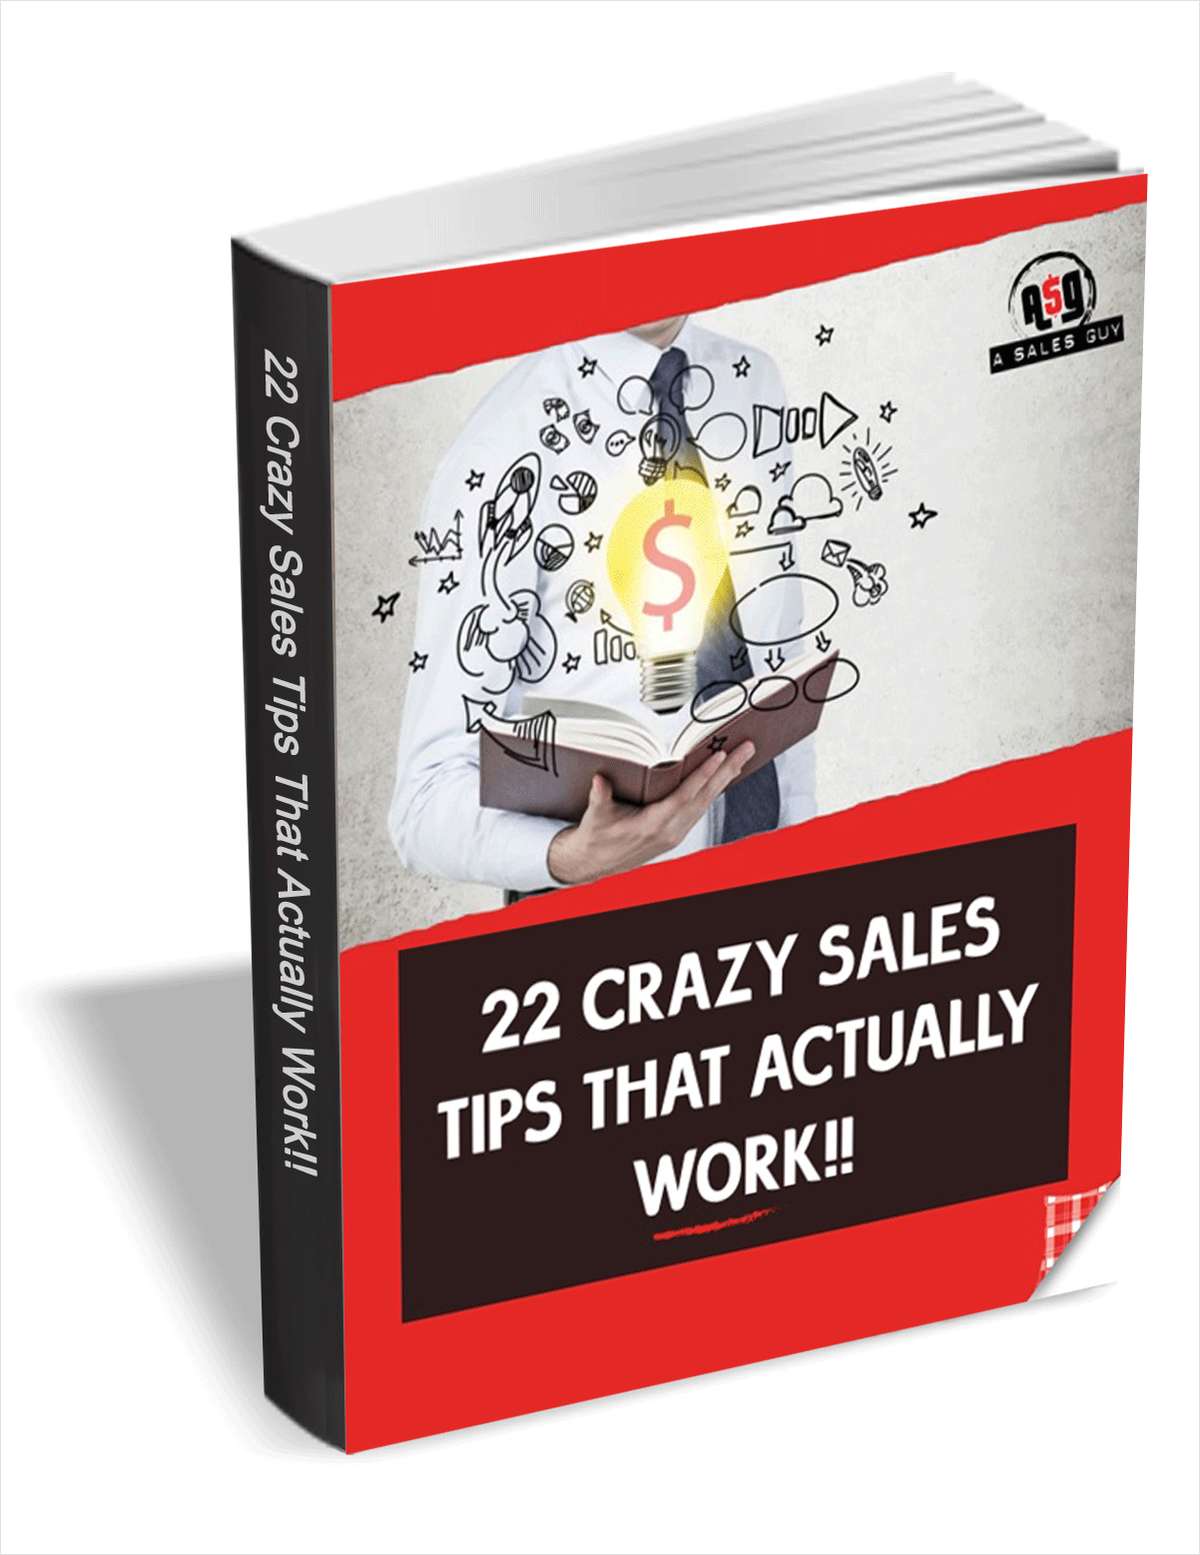 22 Crazy Sales Tips that Actually Work